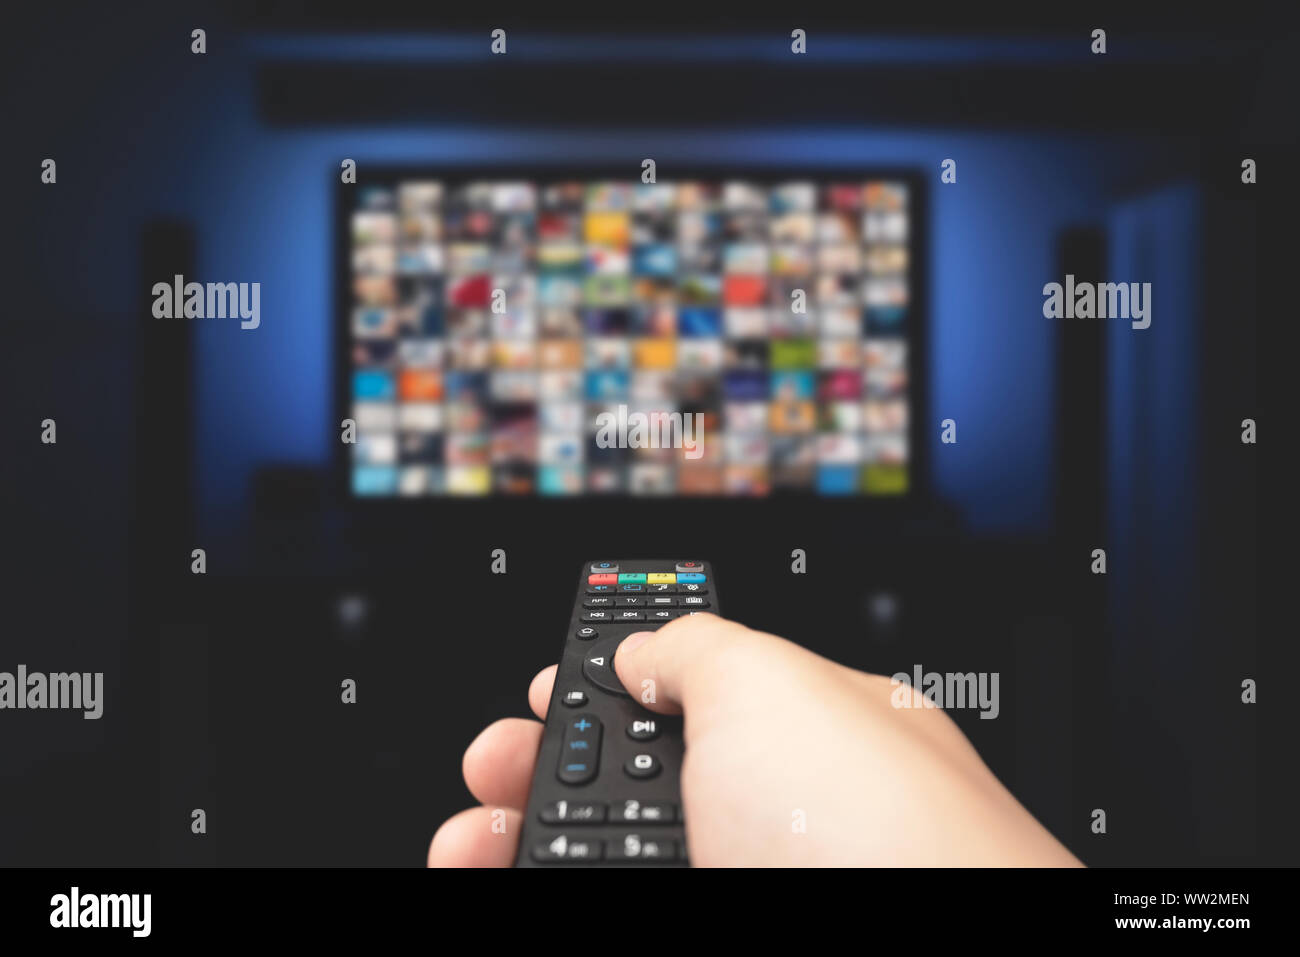 Multimedia video concept on TV set in dark room. Man watching TV with remote control in hand. Stock Photo